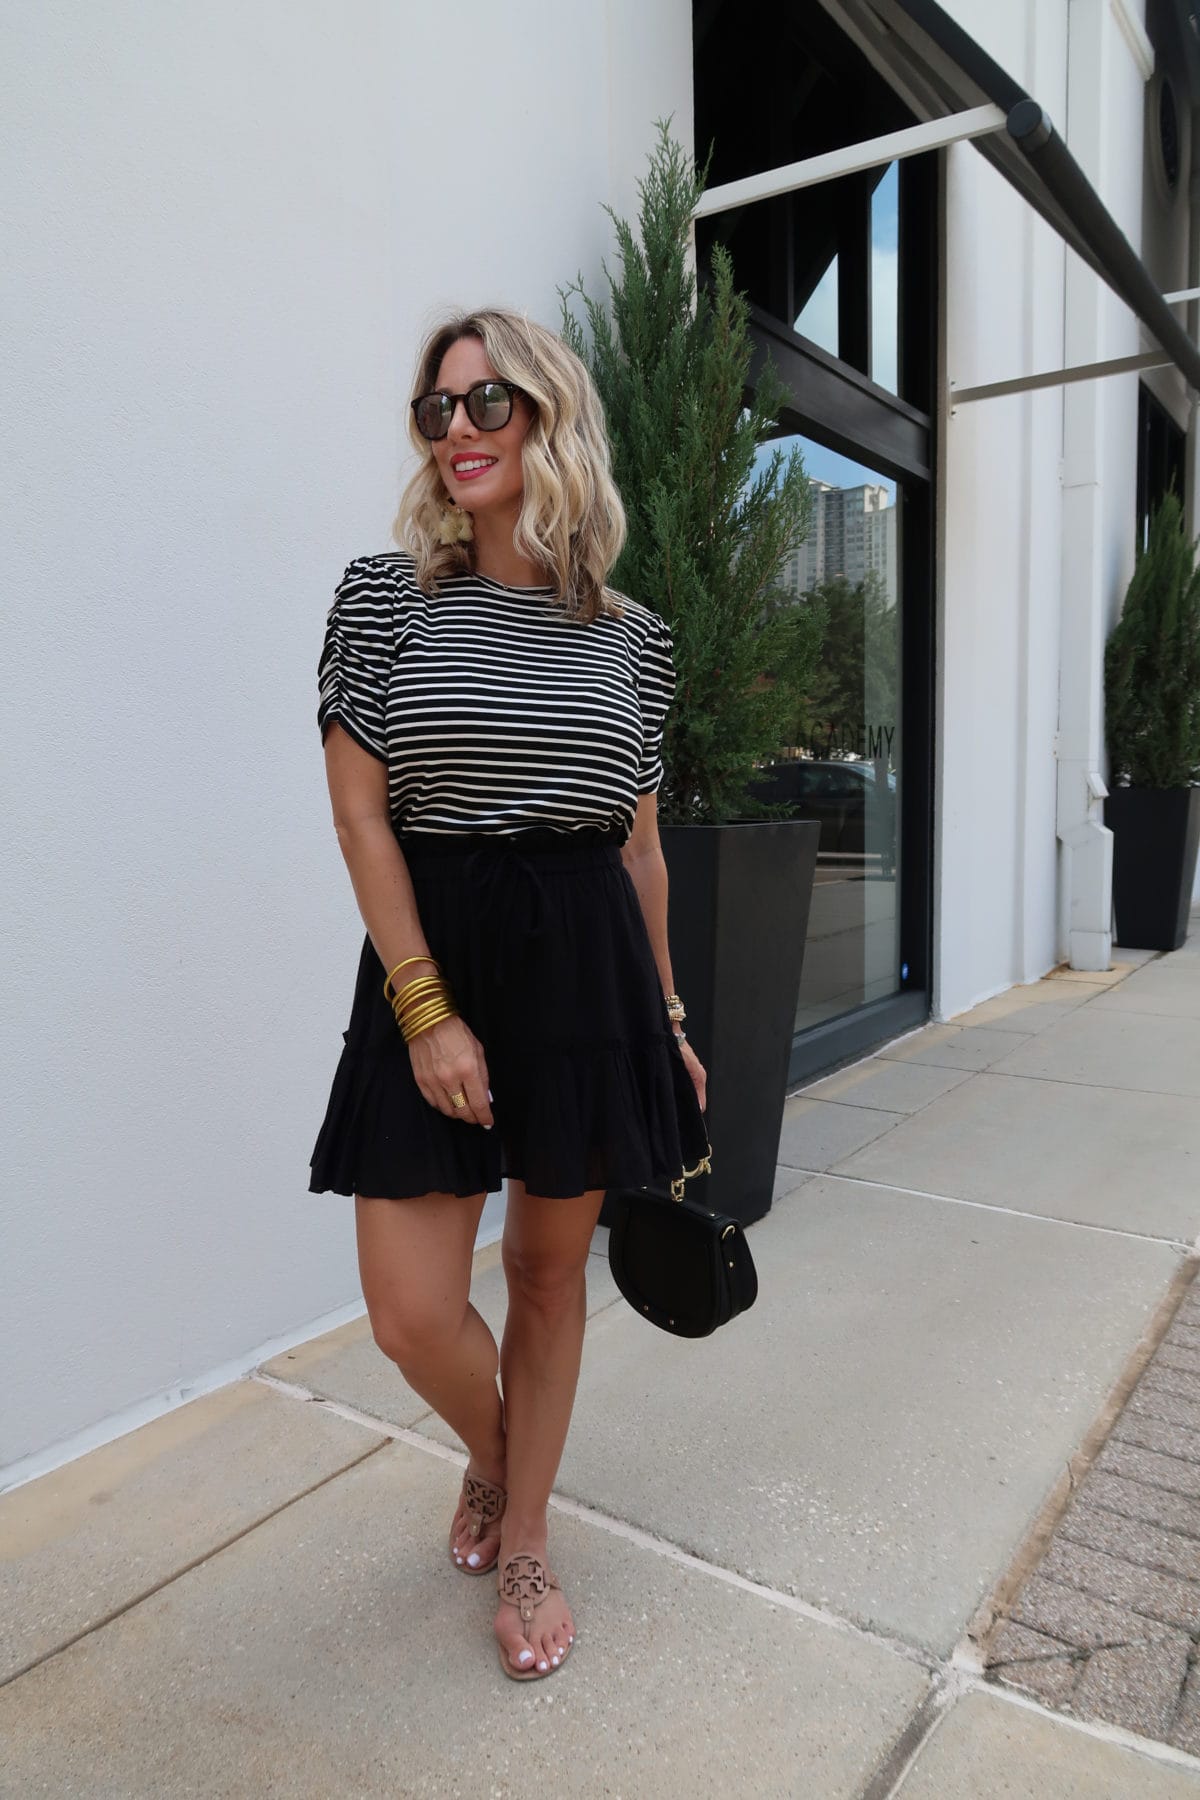 New Summer Styles, Gibson and Nordstrom, Stripe Top, Black Tiered Skirt, Miller Sandals, Ring Bag